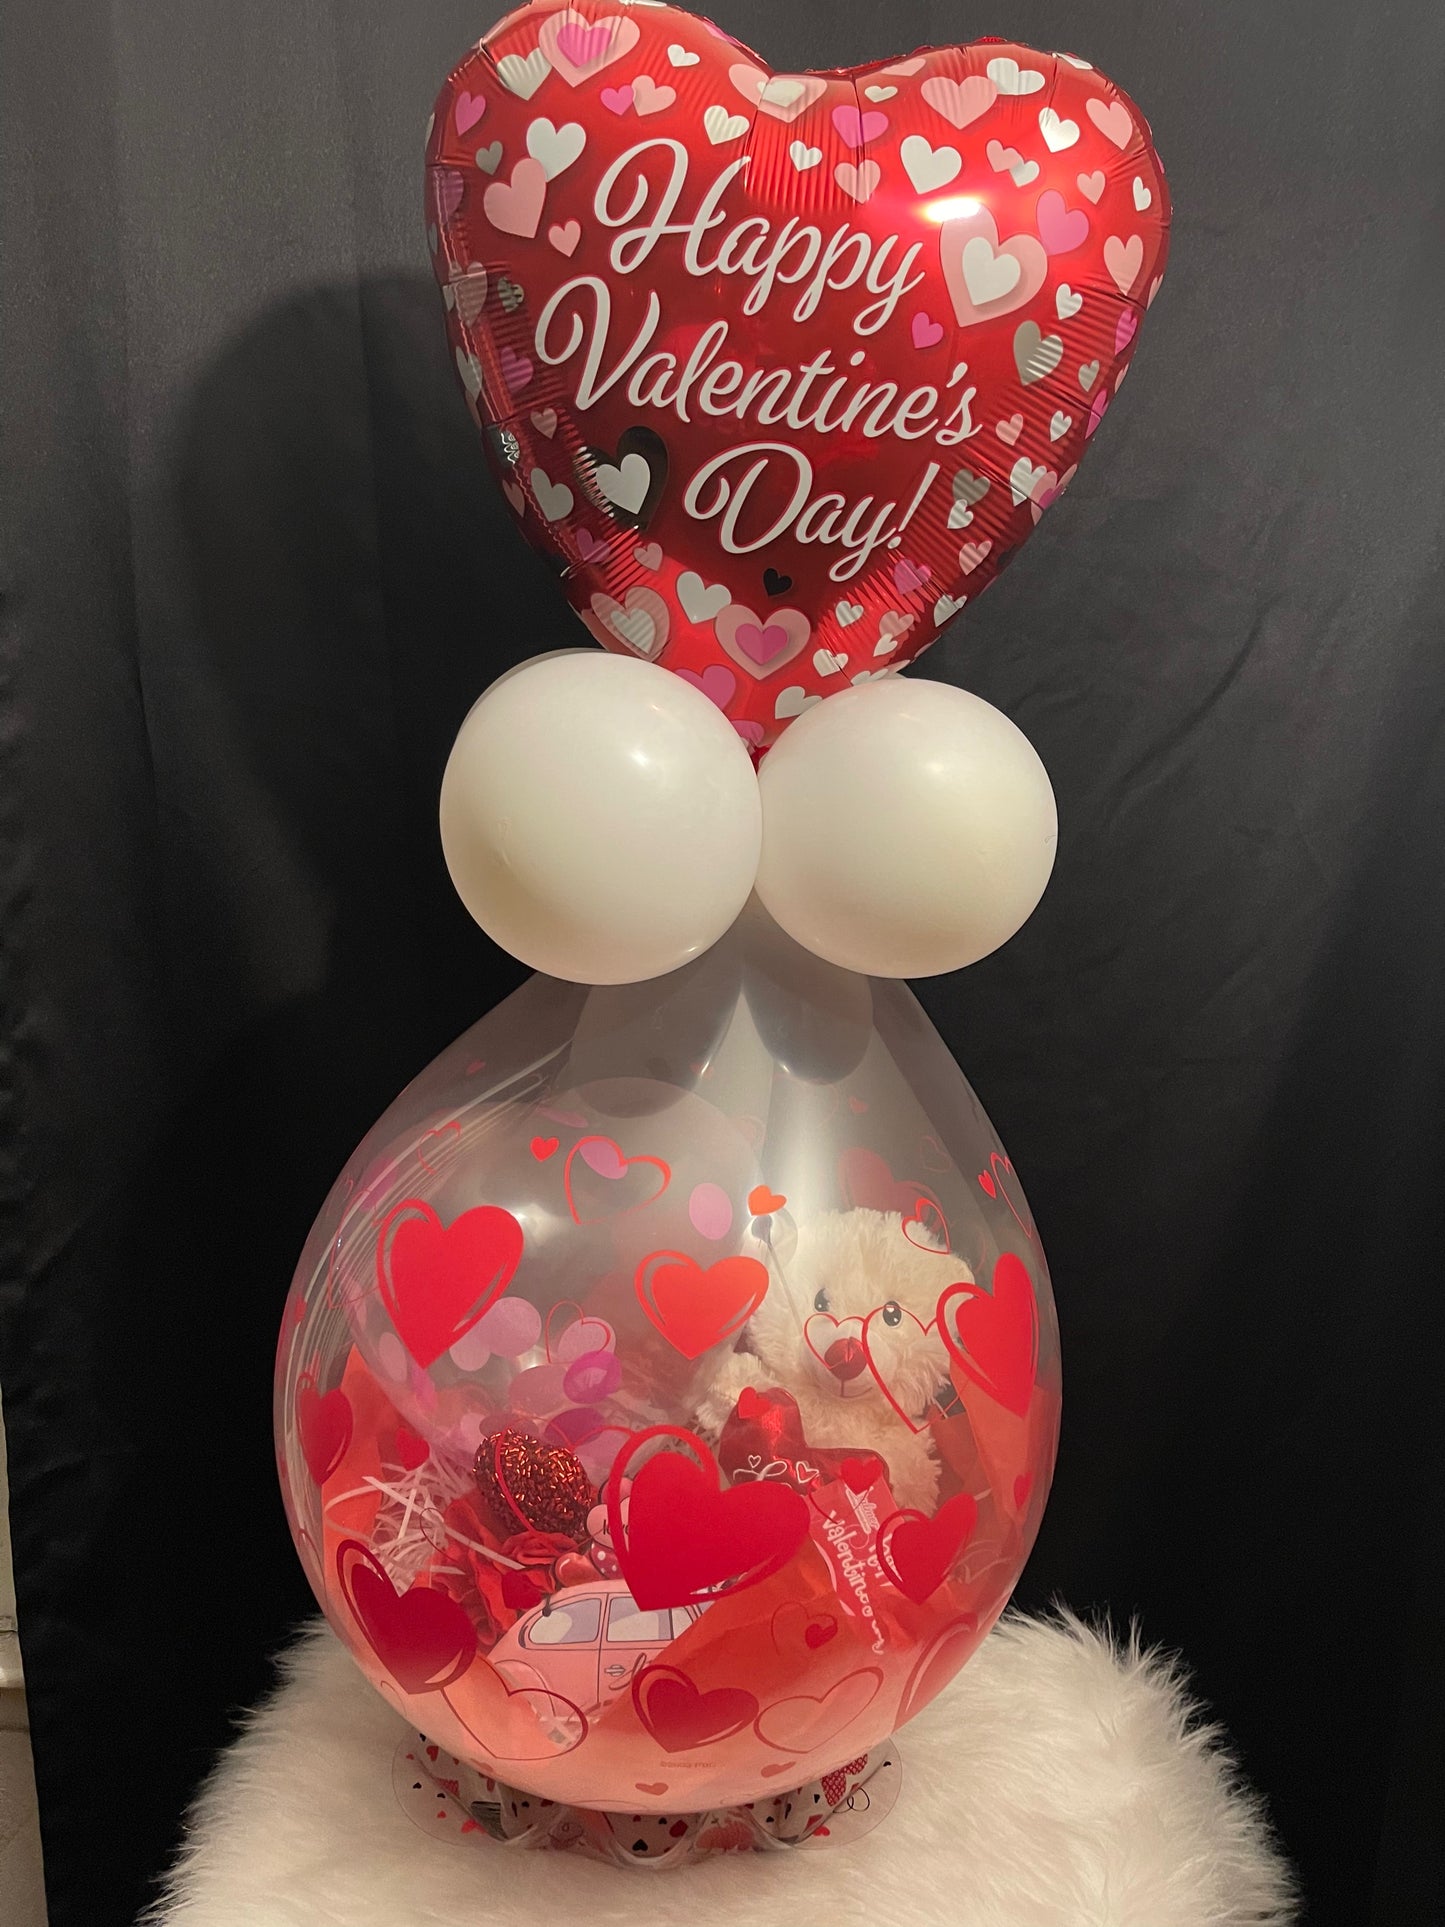 Gift in a Balloons (includes bear, candy, and rose)